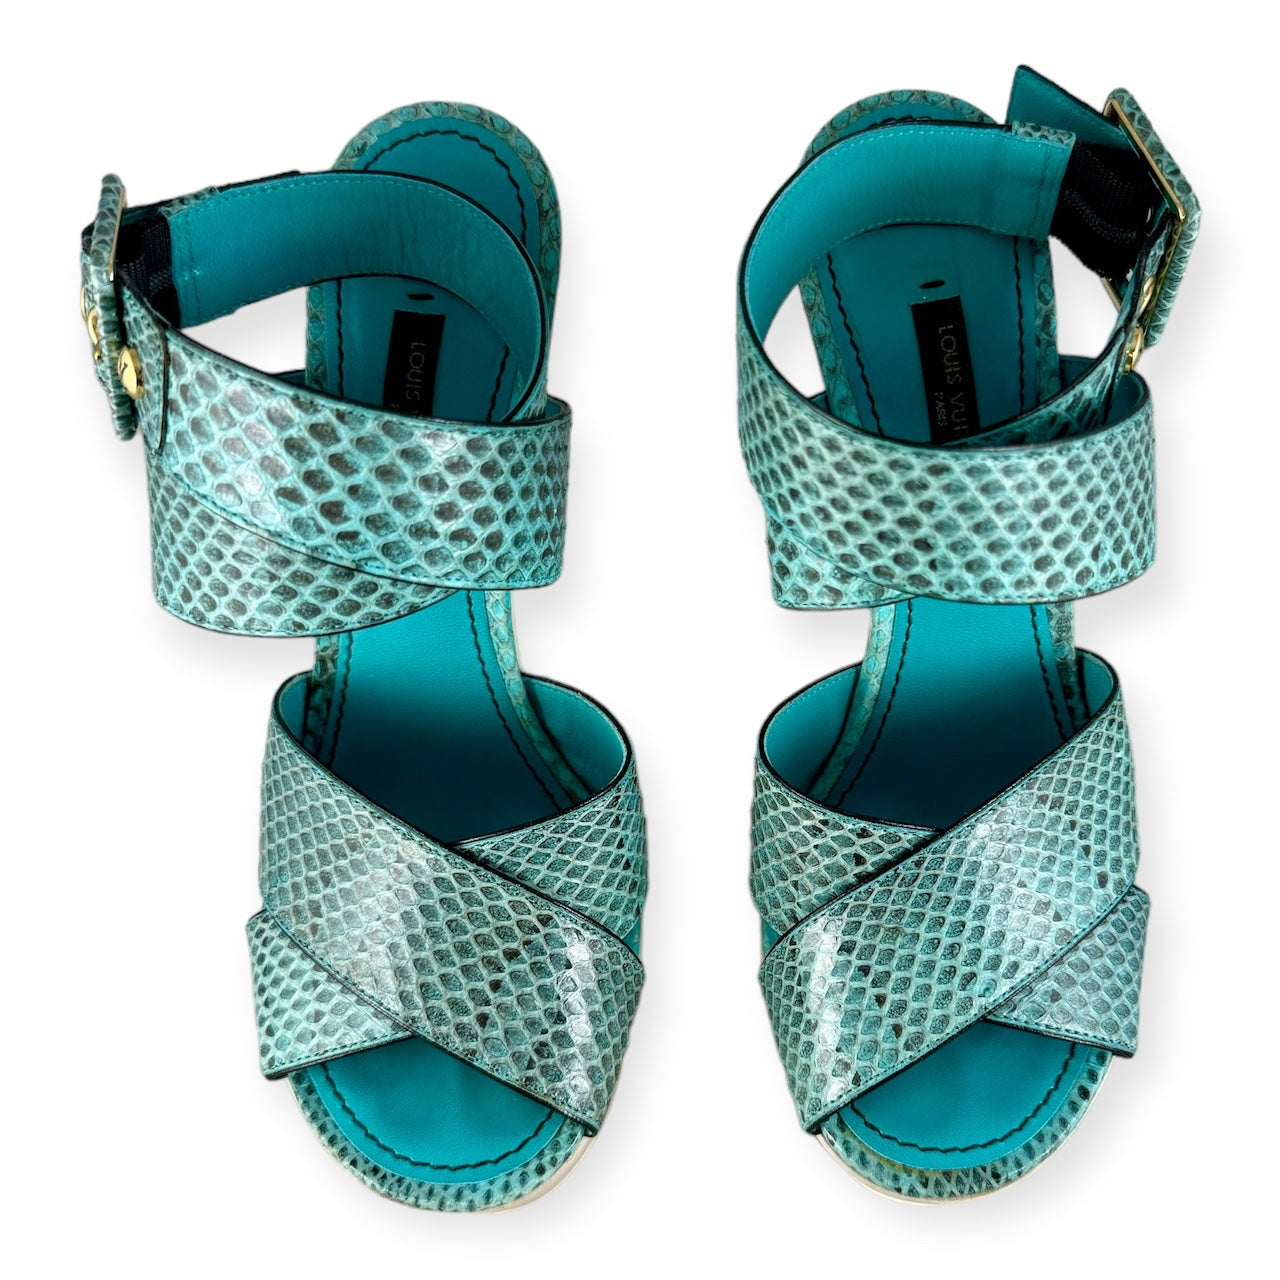 LOUIS VUITTON Snake Wedge Sandals in Turquoise | Size 37.5